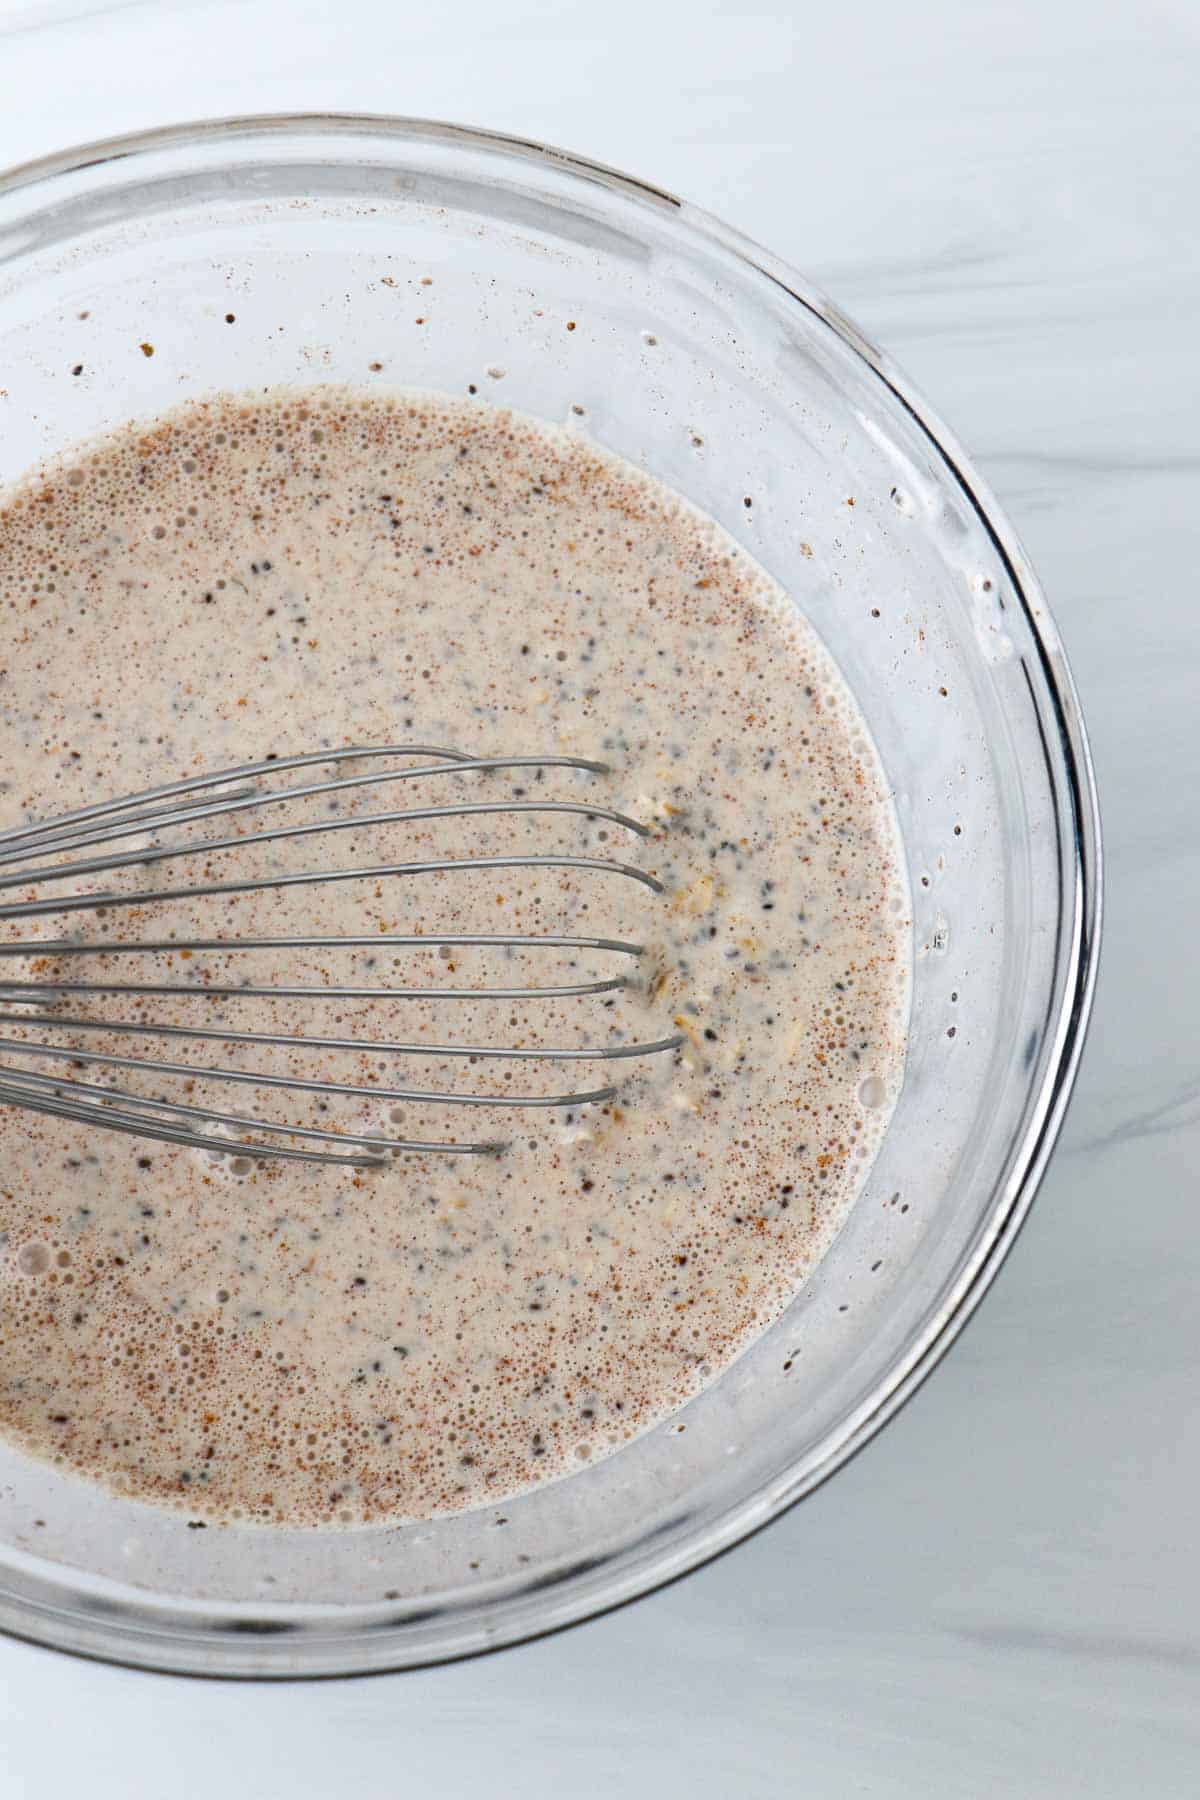 Overnight oats in a glass bowl with a a whisk.